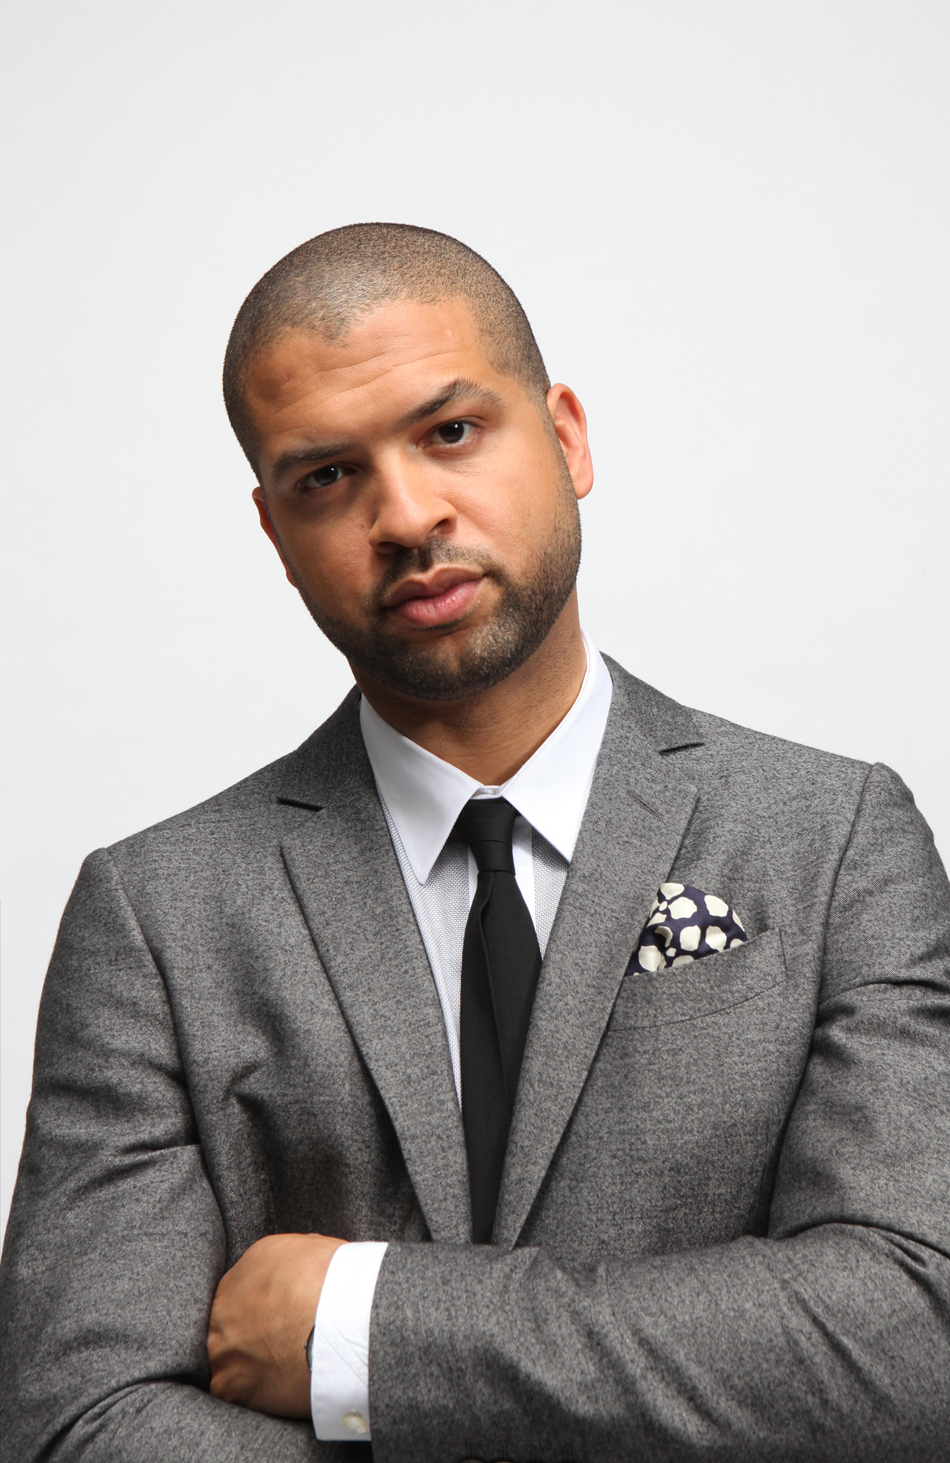 [Image description: A photo of artist Jason Moran. He stands with his arms crossed looking directly into the camera. He wears a gray suit jacket, white collared shirt, black tie, and black and white pocket square.] 